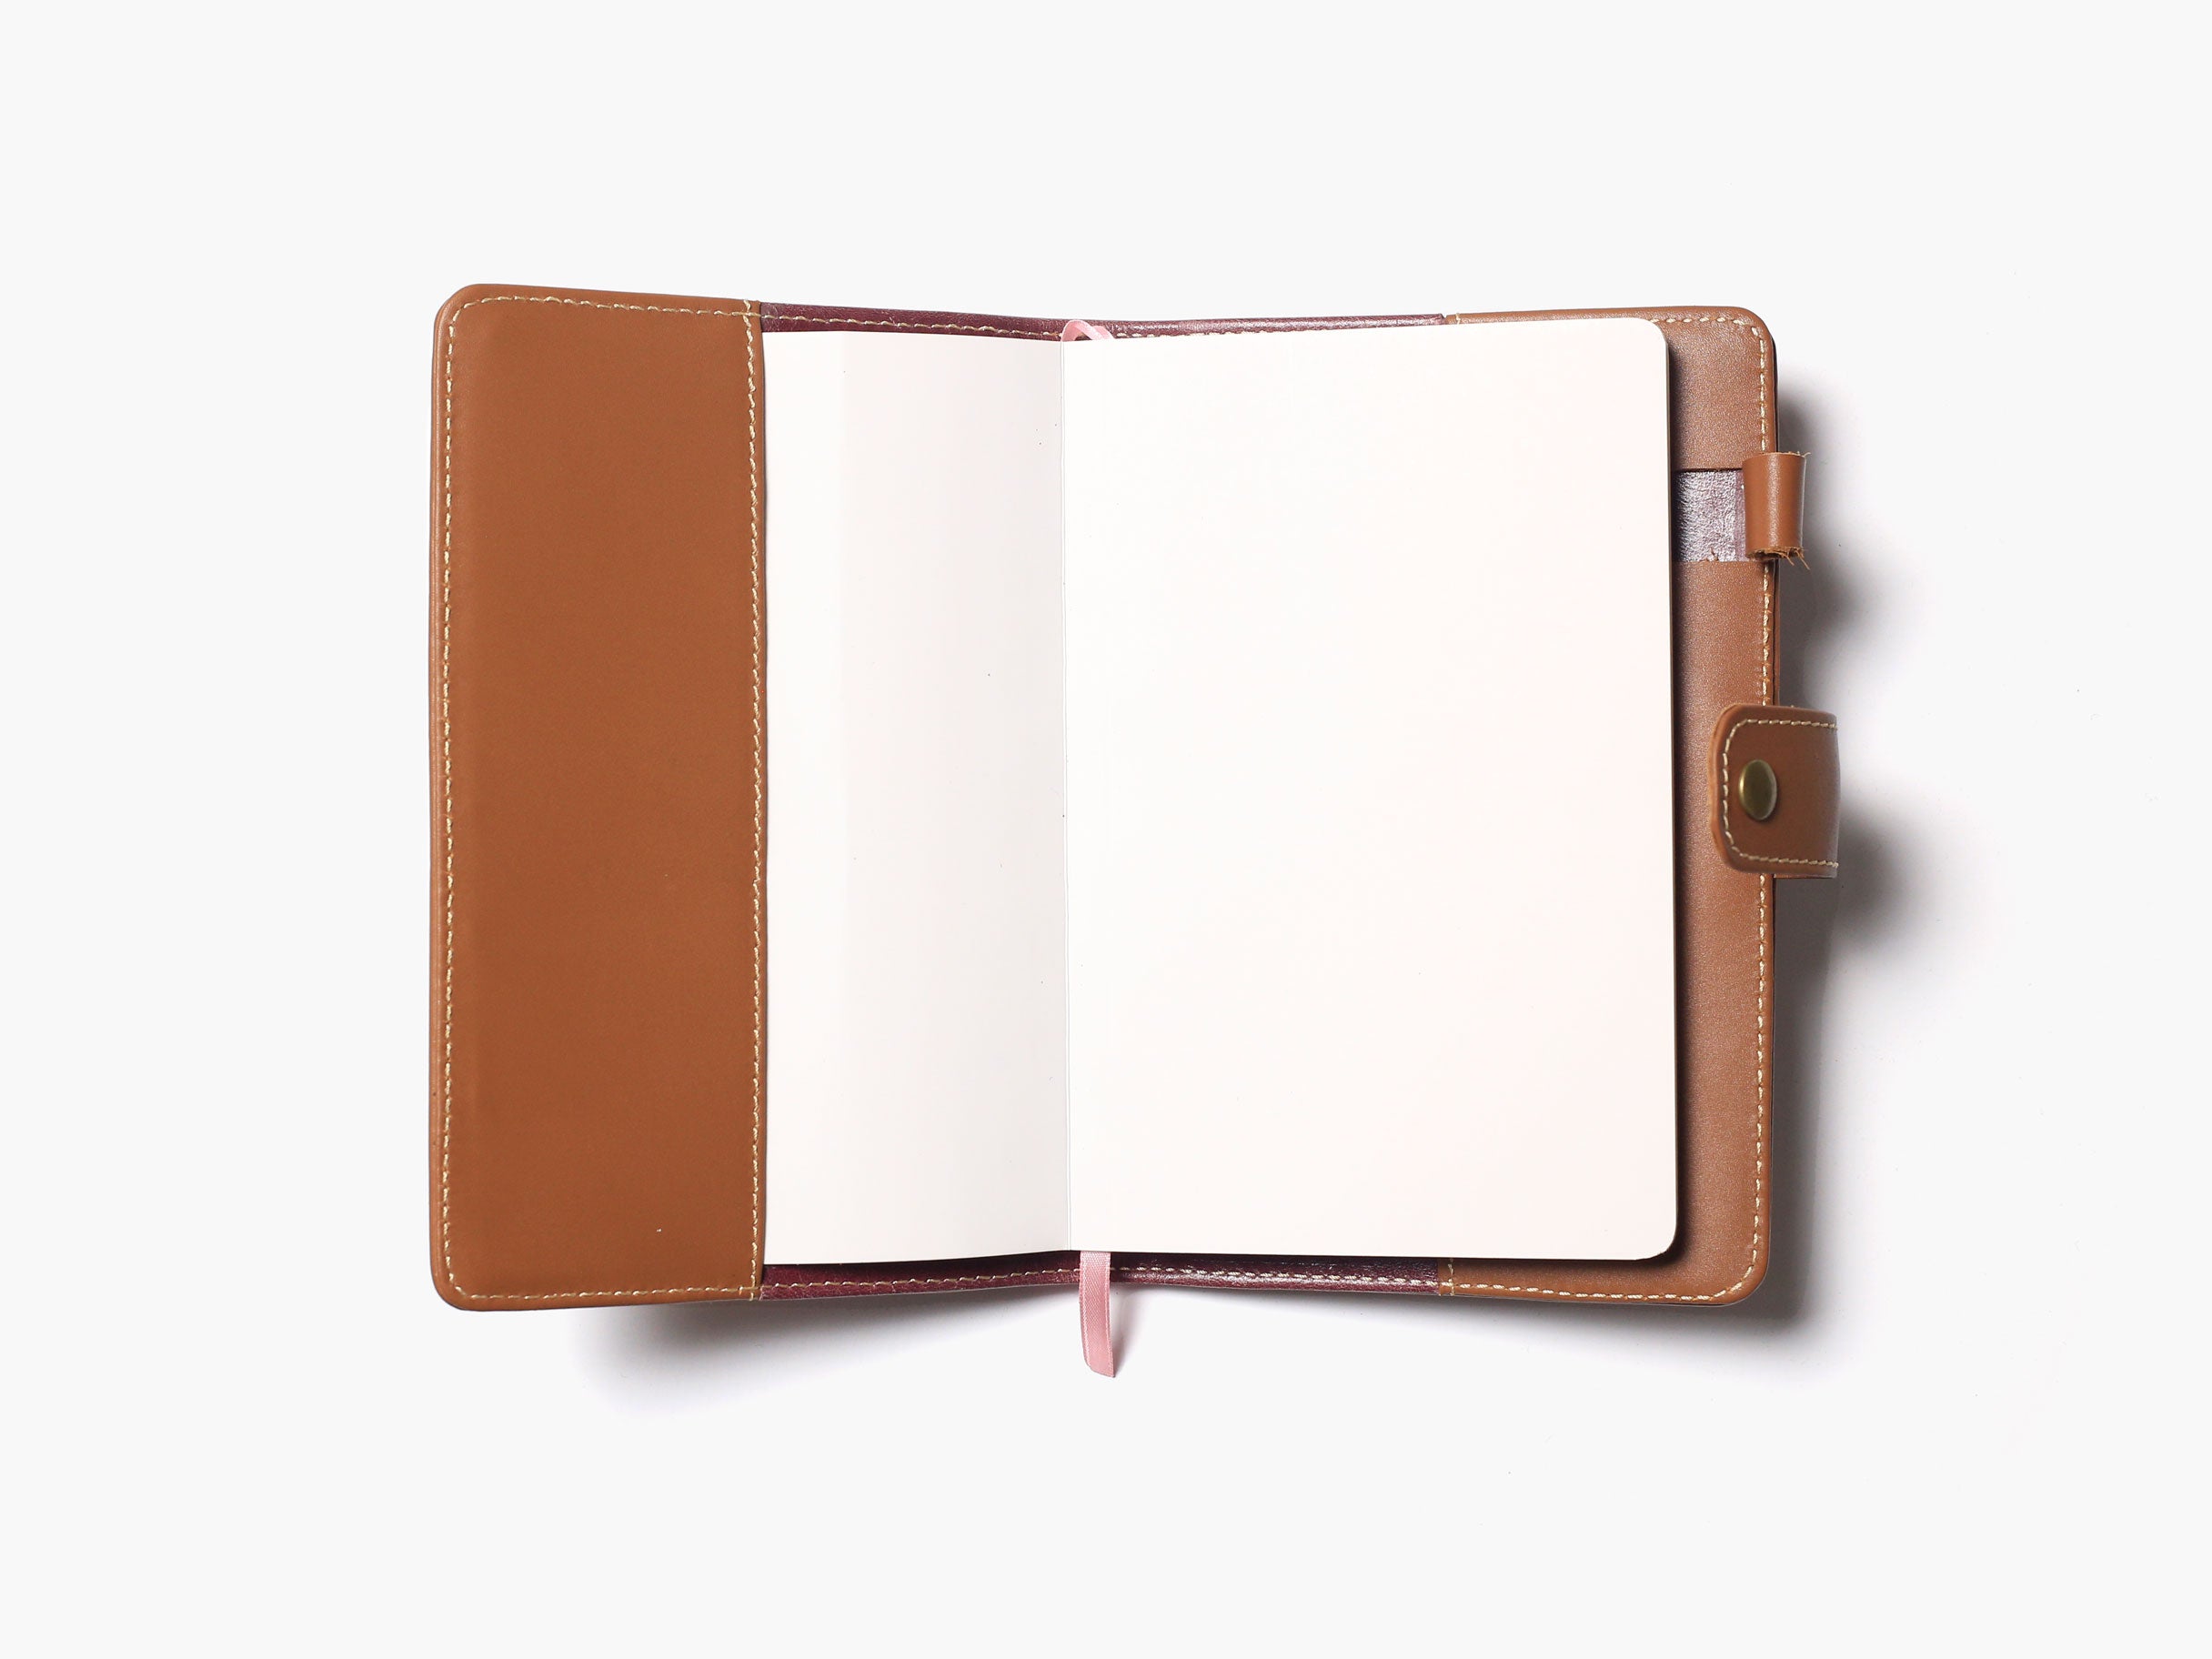 The Leather Journal